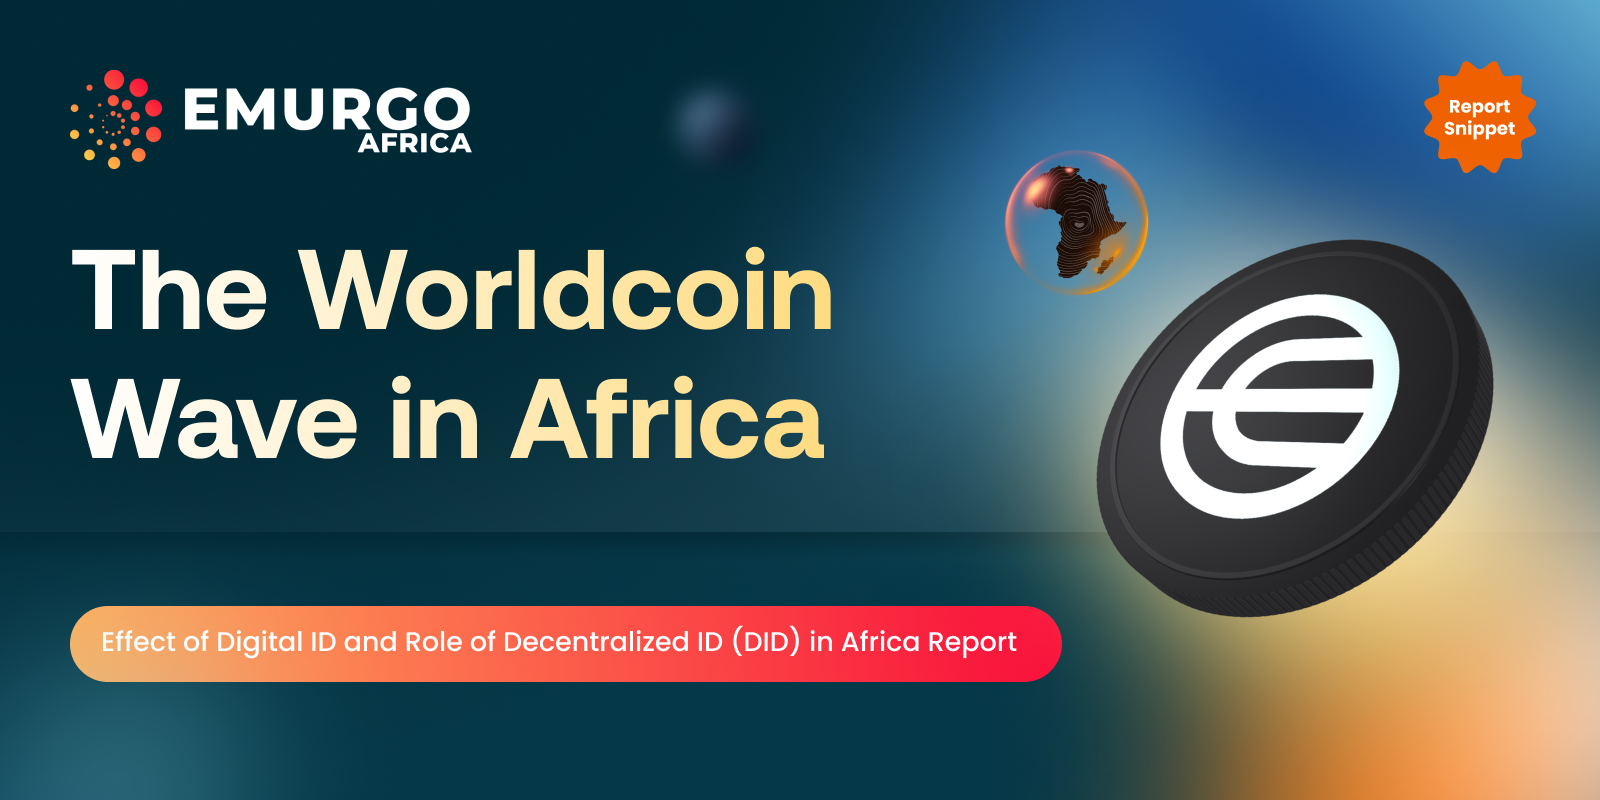 The Worldcoin Wave in Africa